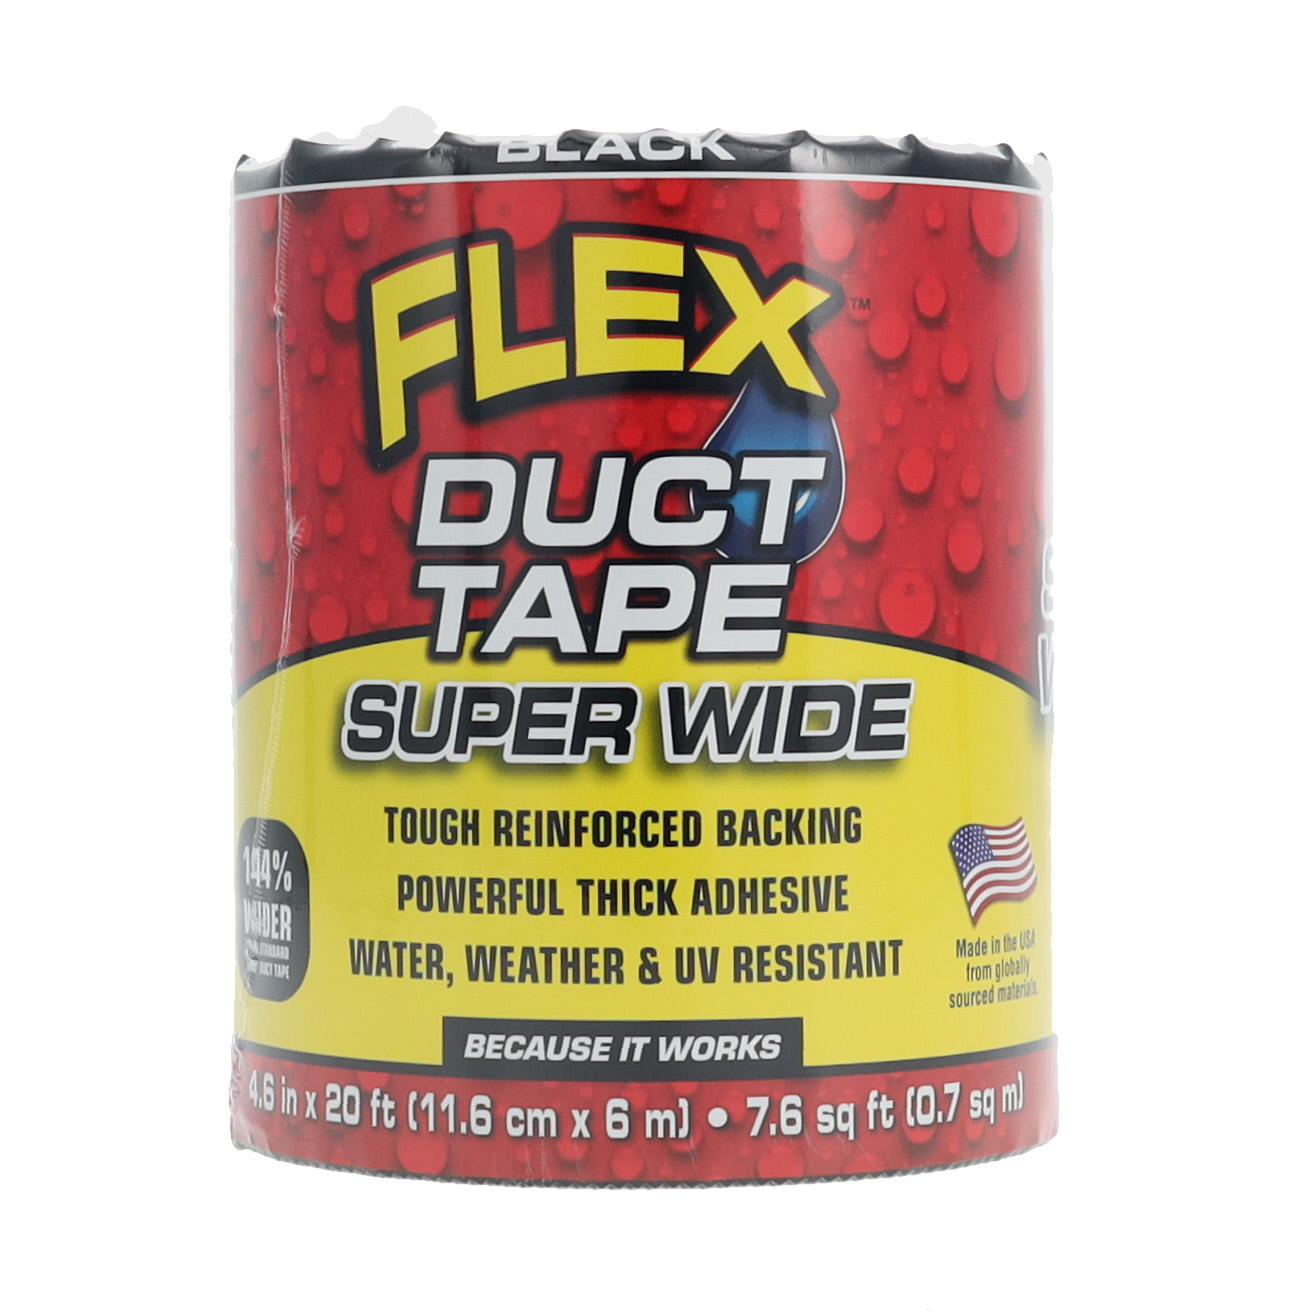 Flex Seal Super Wide Flex Duct Tape DTBLKR4620 4.6 Inch X 20 Feet Removable Repositionable Thick Adhesive Heavy-Duty Tape-Black